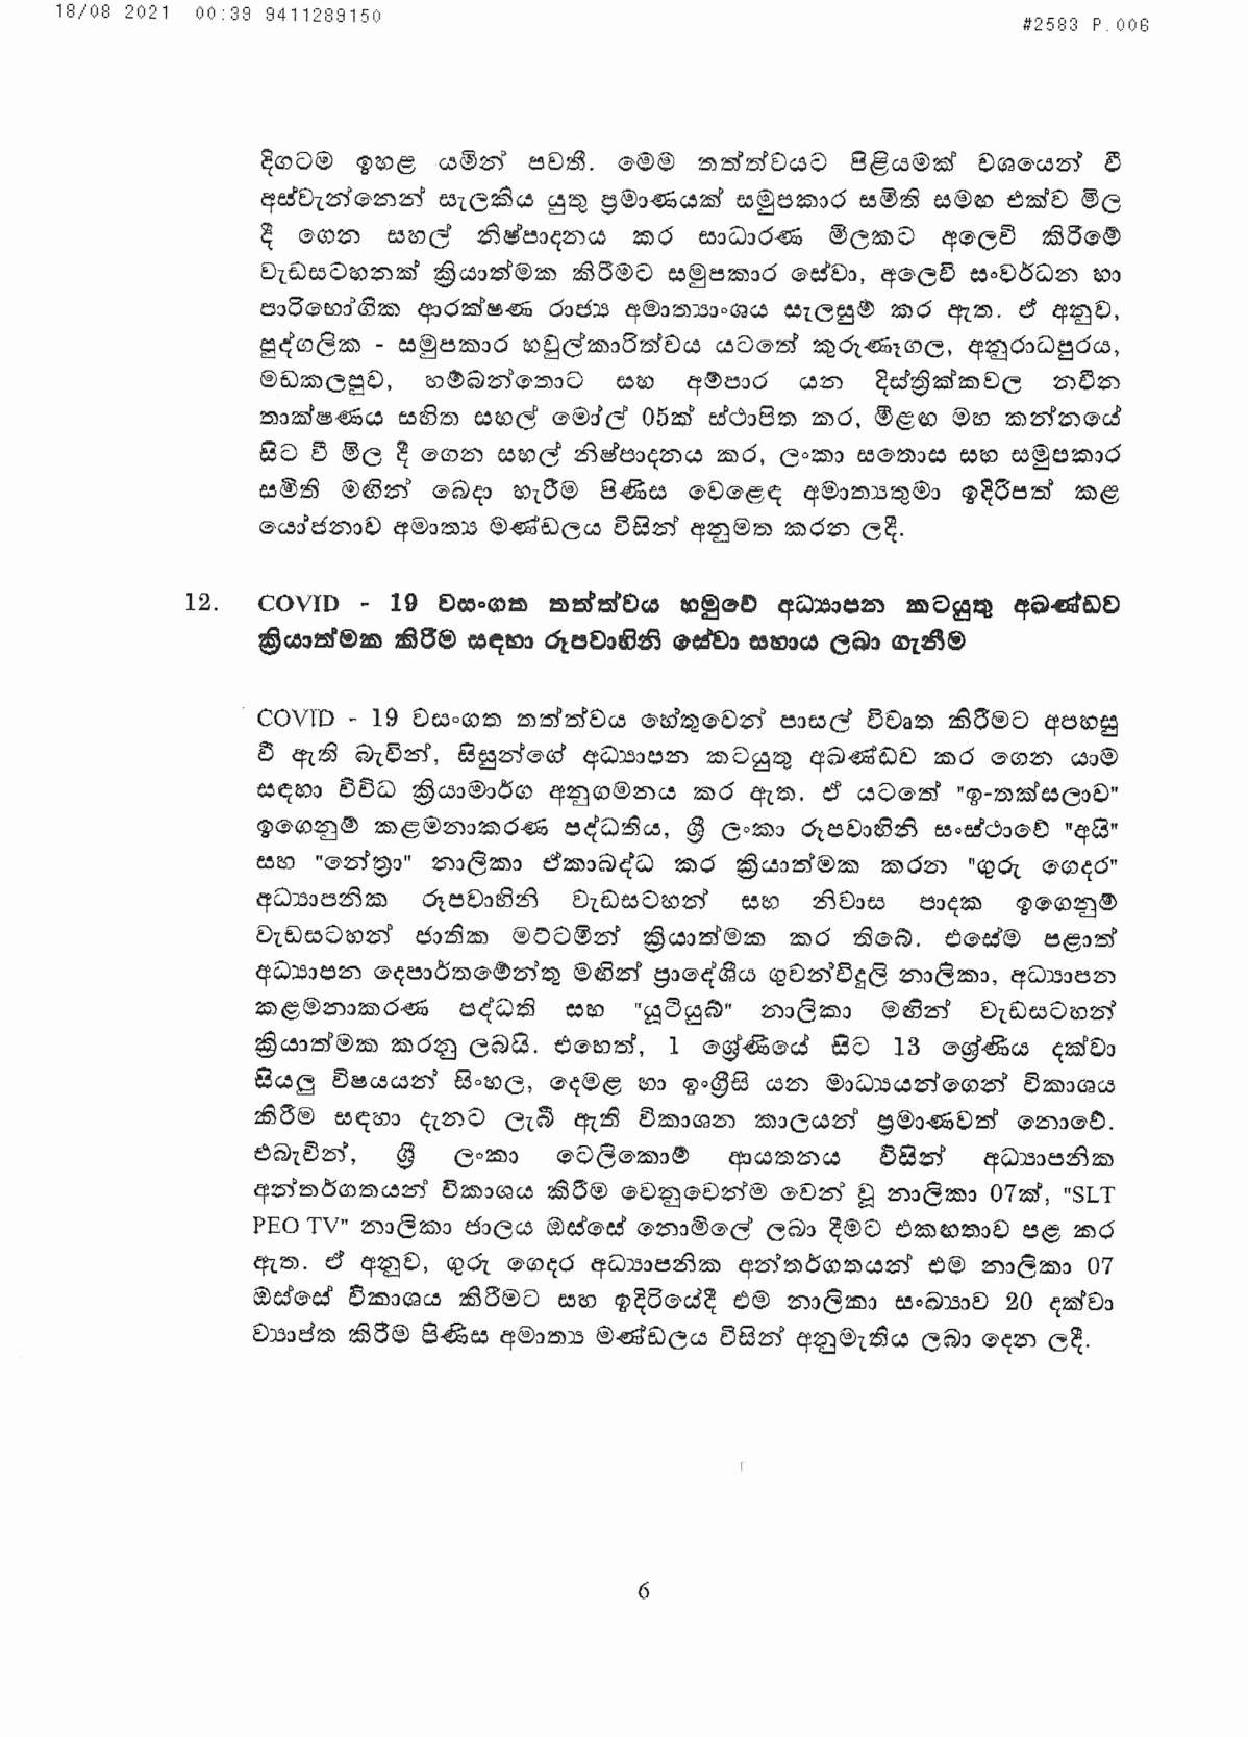 Cabinet Decisions on 17.08.2021 S page 006